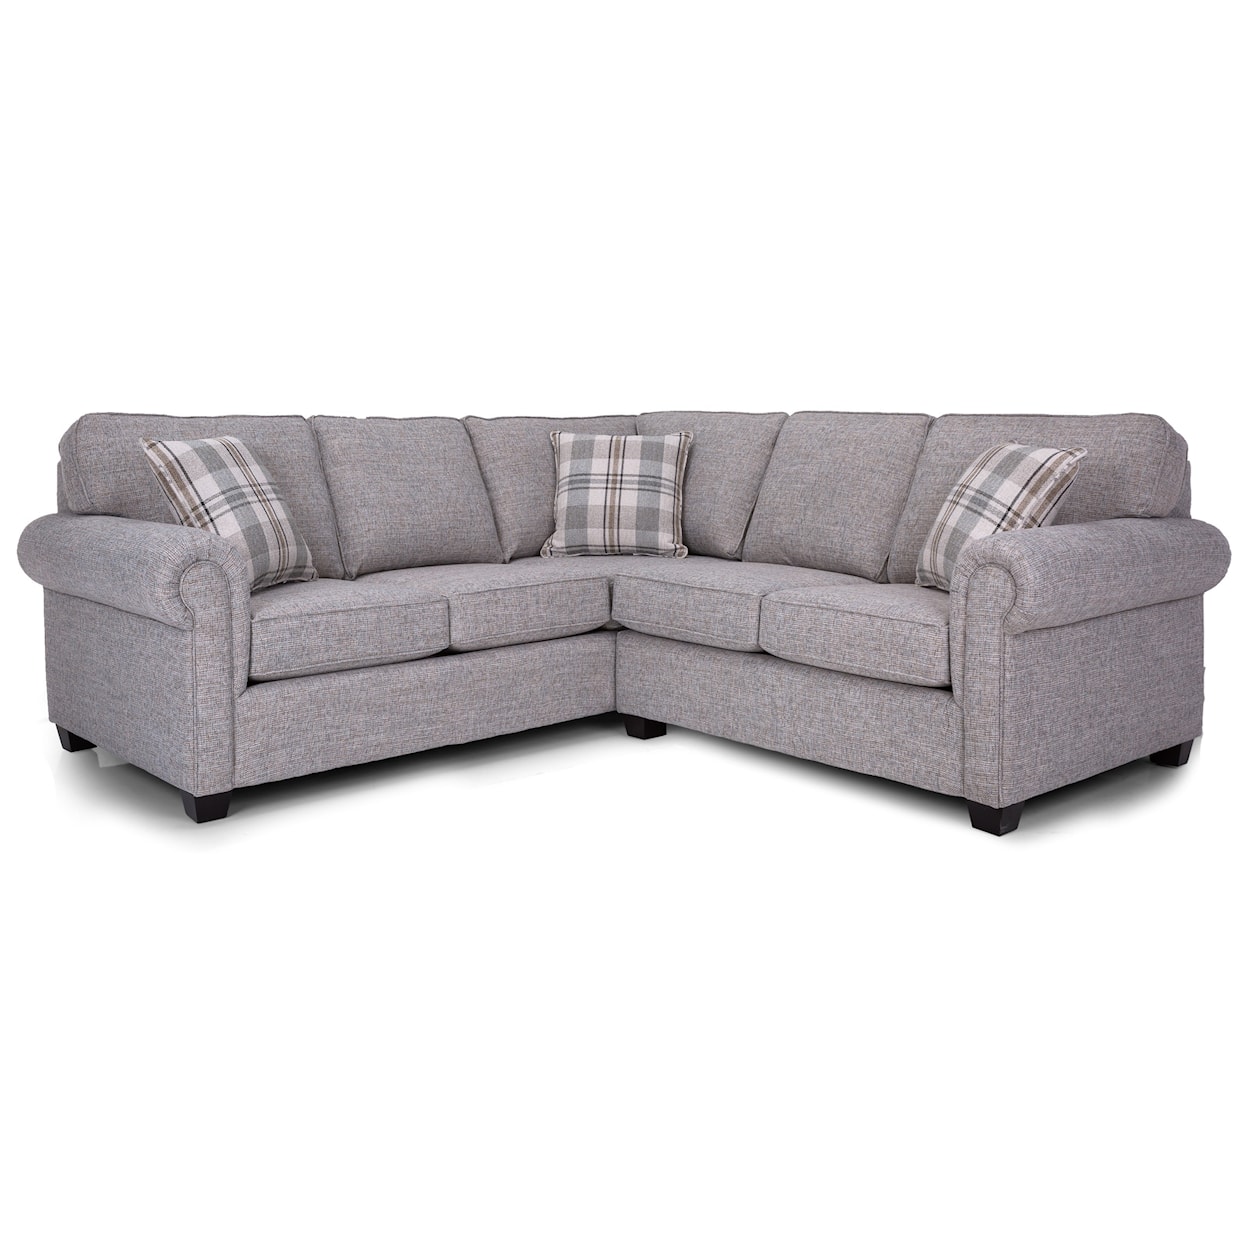 Decor-Rest 2006 Sectional Series L-Shaped Sectional